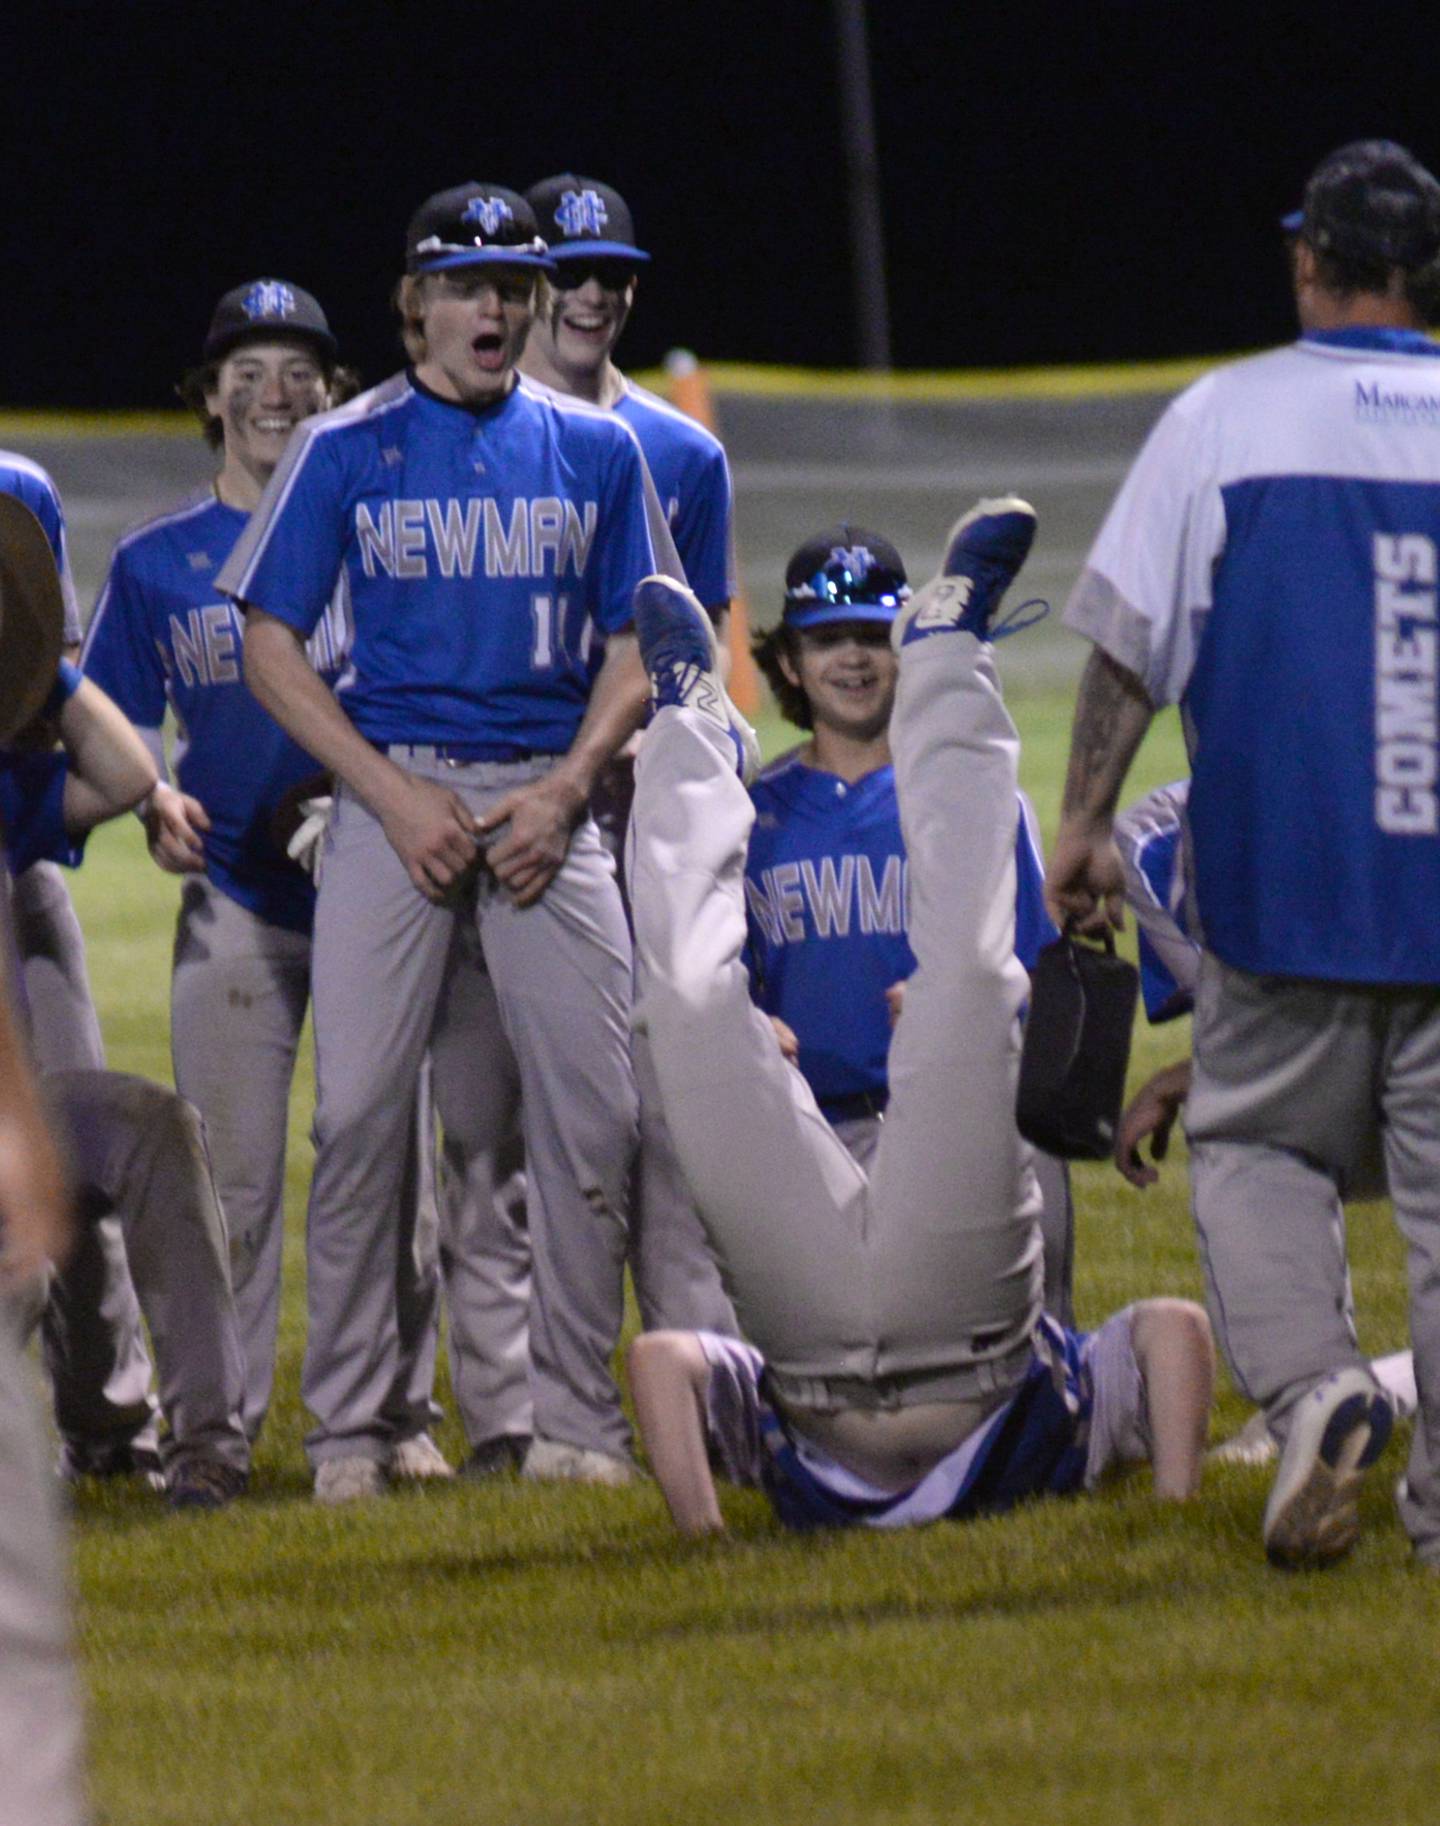 Newman players have some fun watching one of their teammates do a belly flop after beating Pearl City at the 1A Pearl City Sectional on Wednesday, May 24.